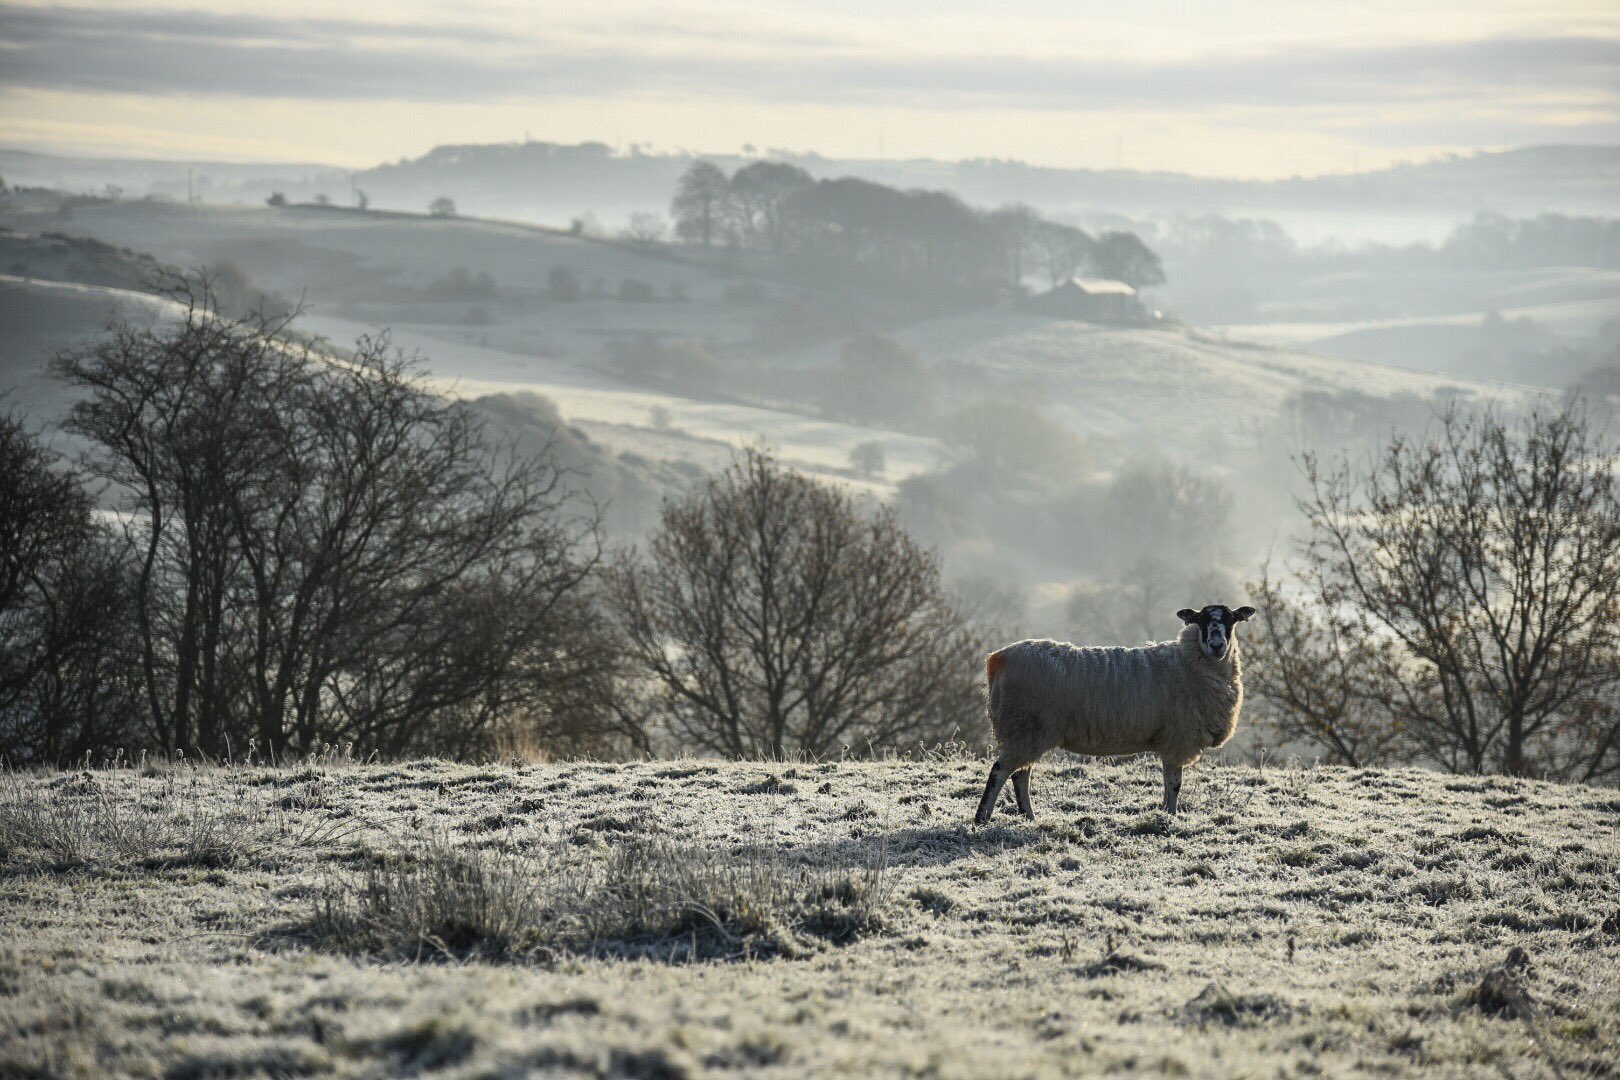 Hard frost in the valley - Hoghton, Lancashire by Wendy Love @wendylov5